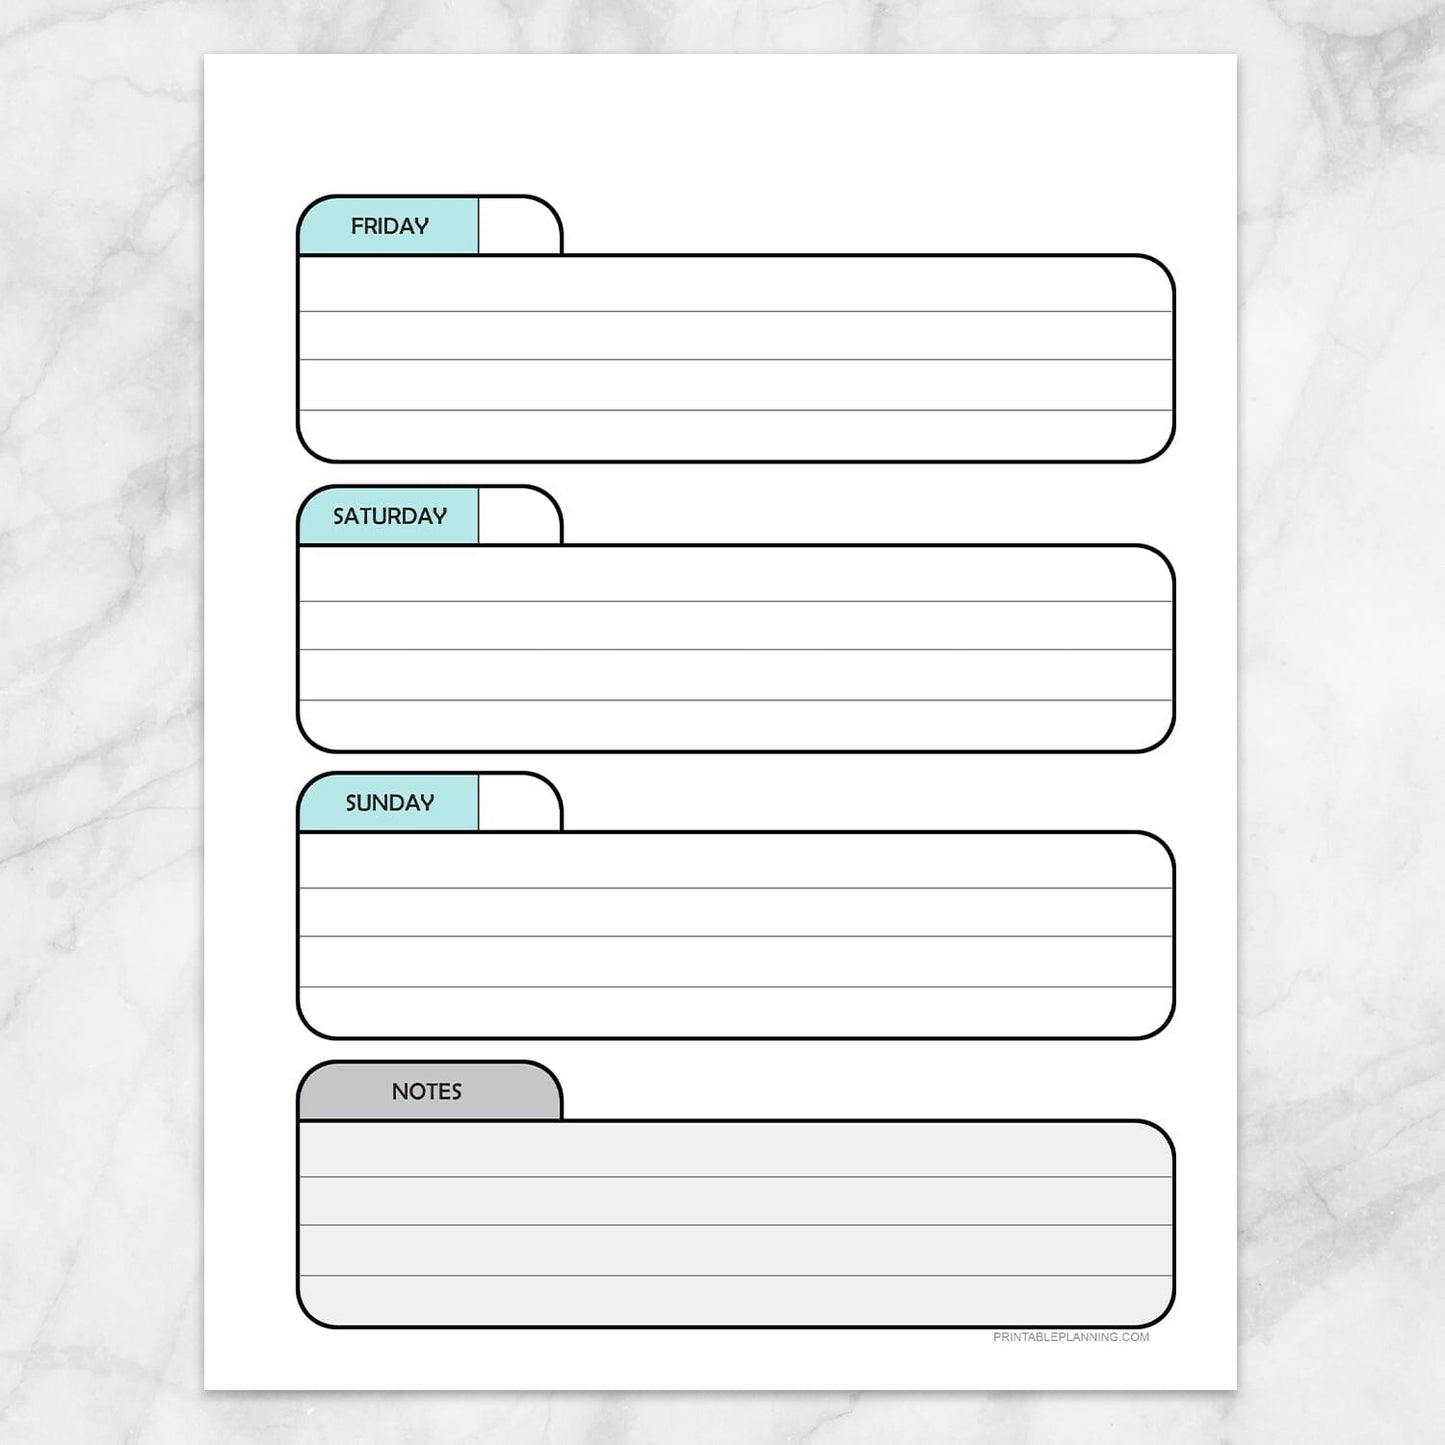 Printable Teal Weekly Calendar Planner Page (right page) at Printable Planning.